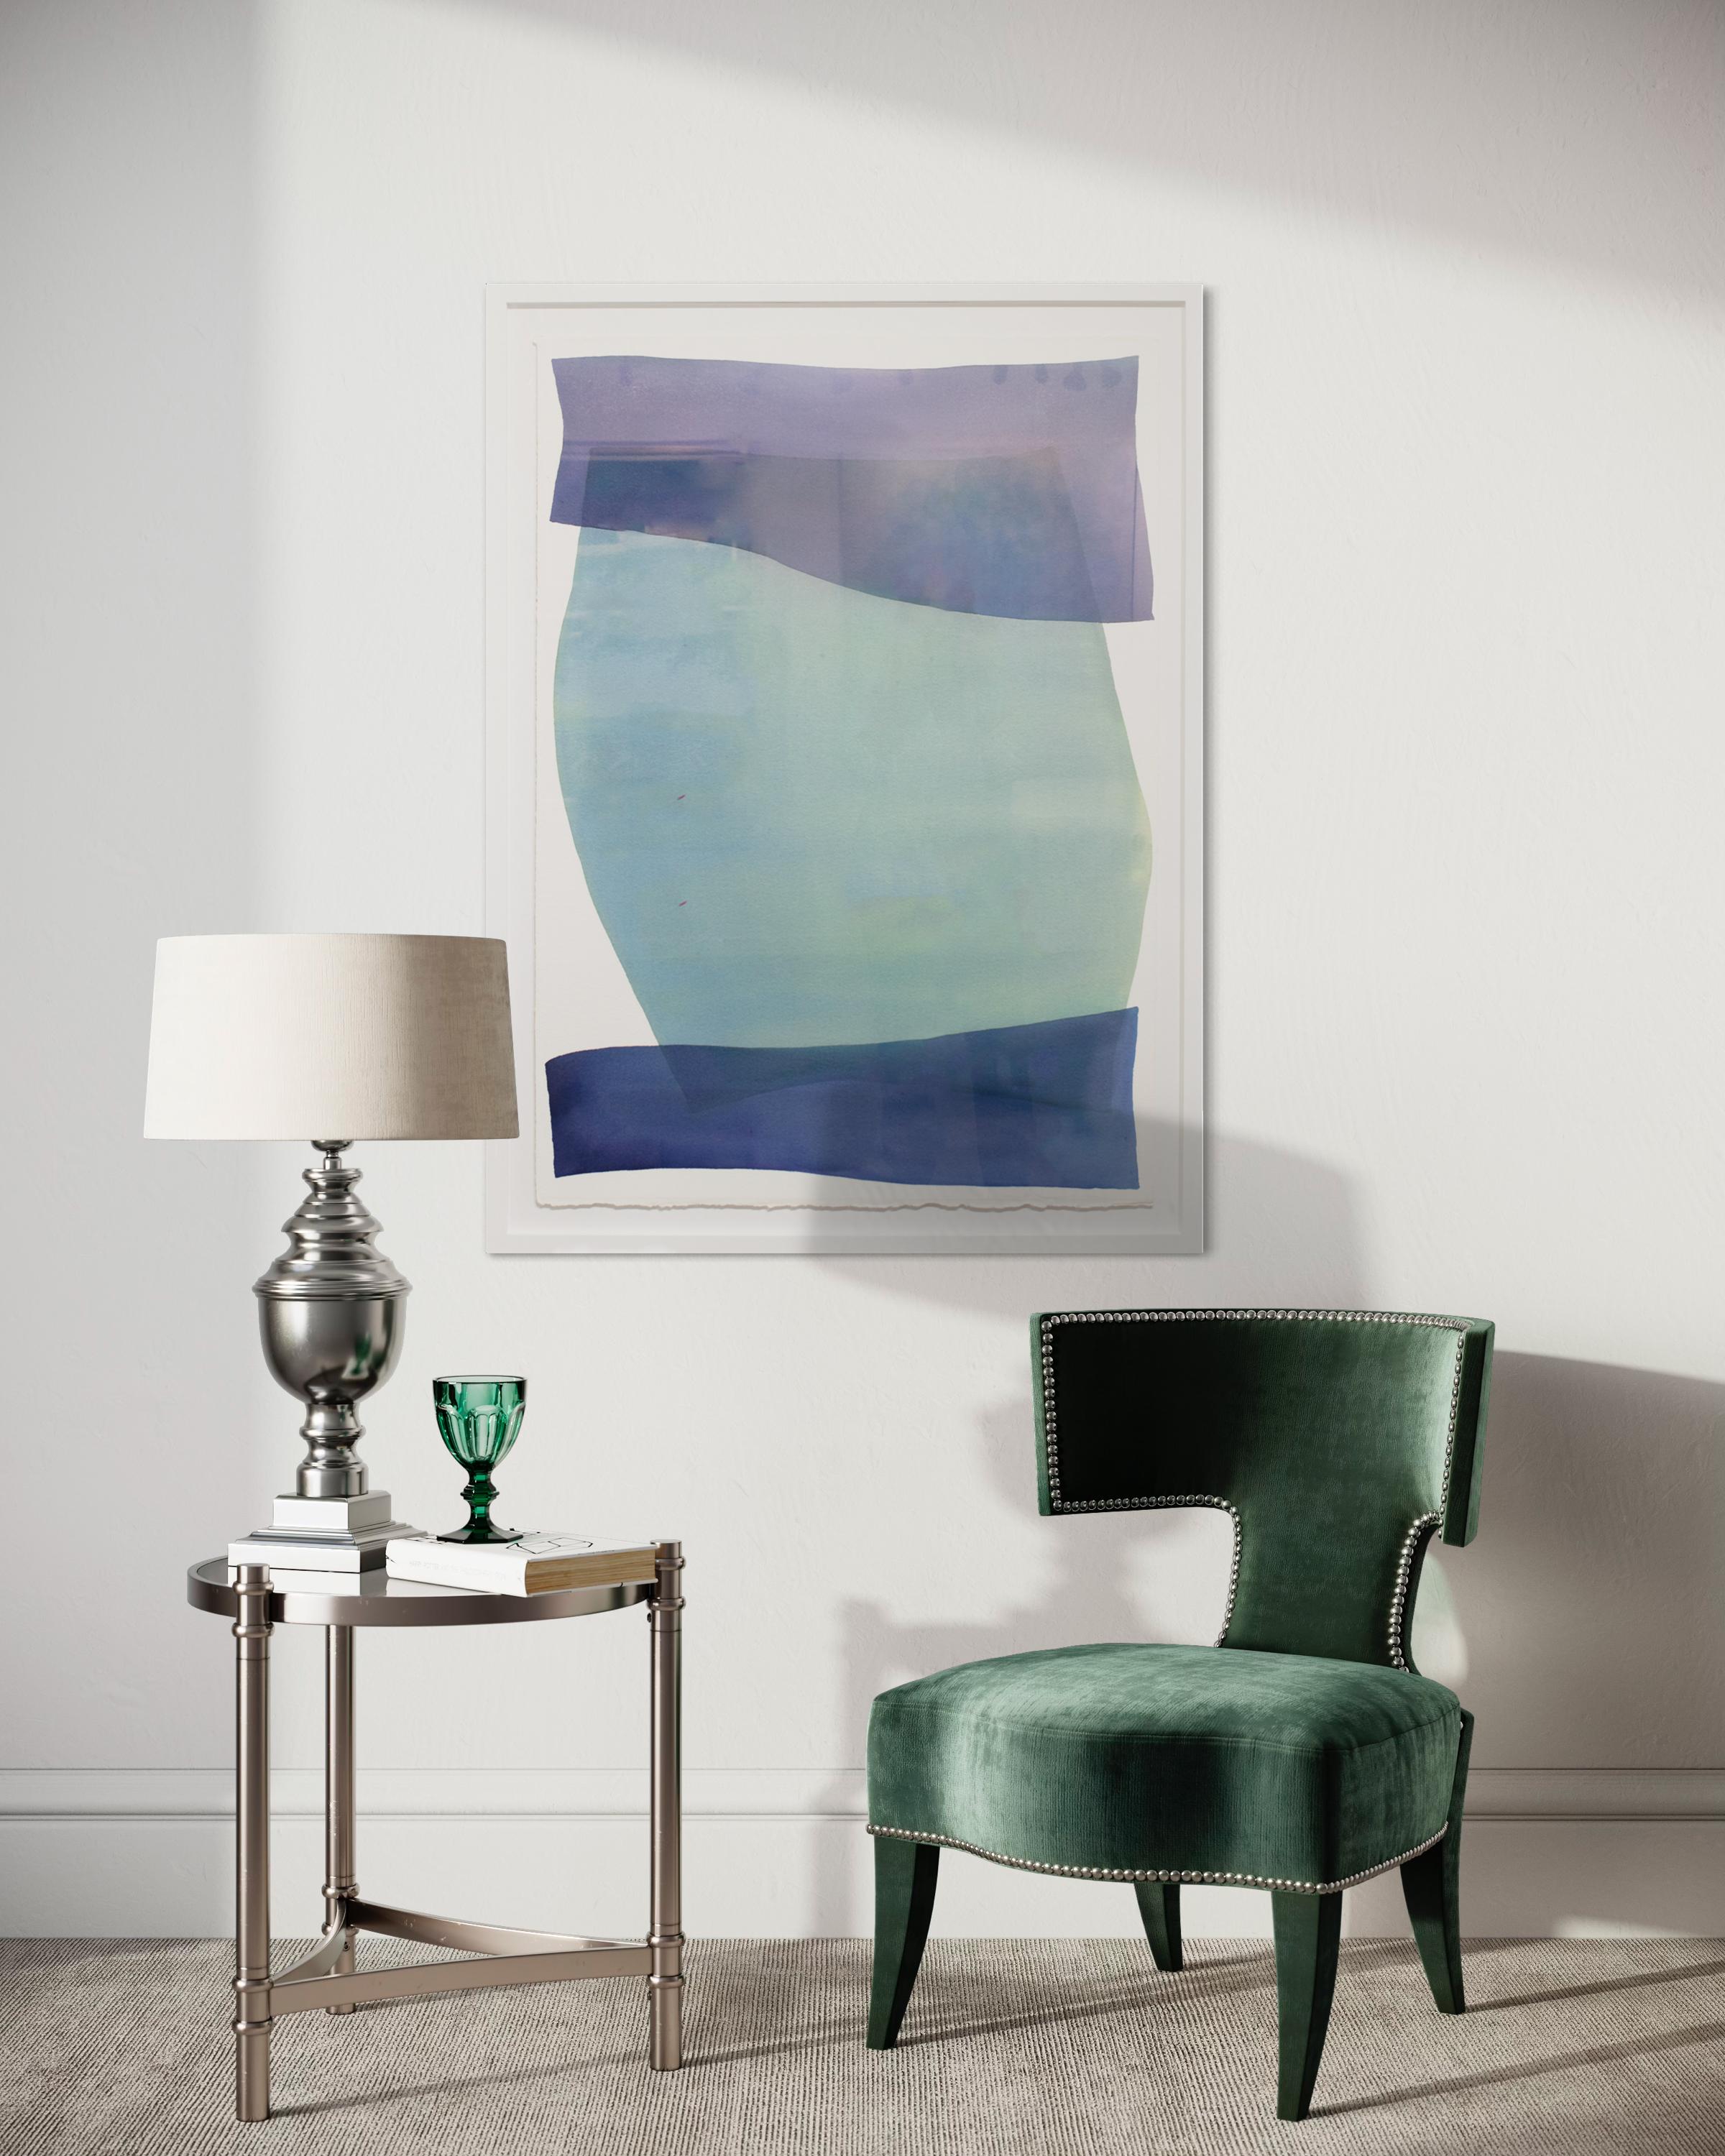 This original abstract watercolor painting by Nealy Hauschildt features a deep blue, violet, and turquoise palette, with three large organic planes of washy color layered over one another for a balanced, minimalistic, abstract composition. The